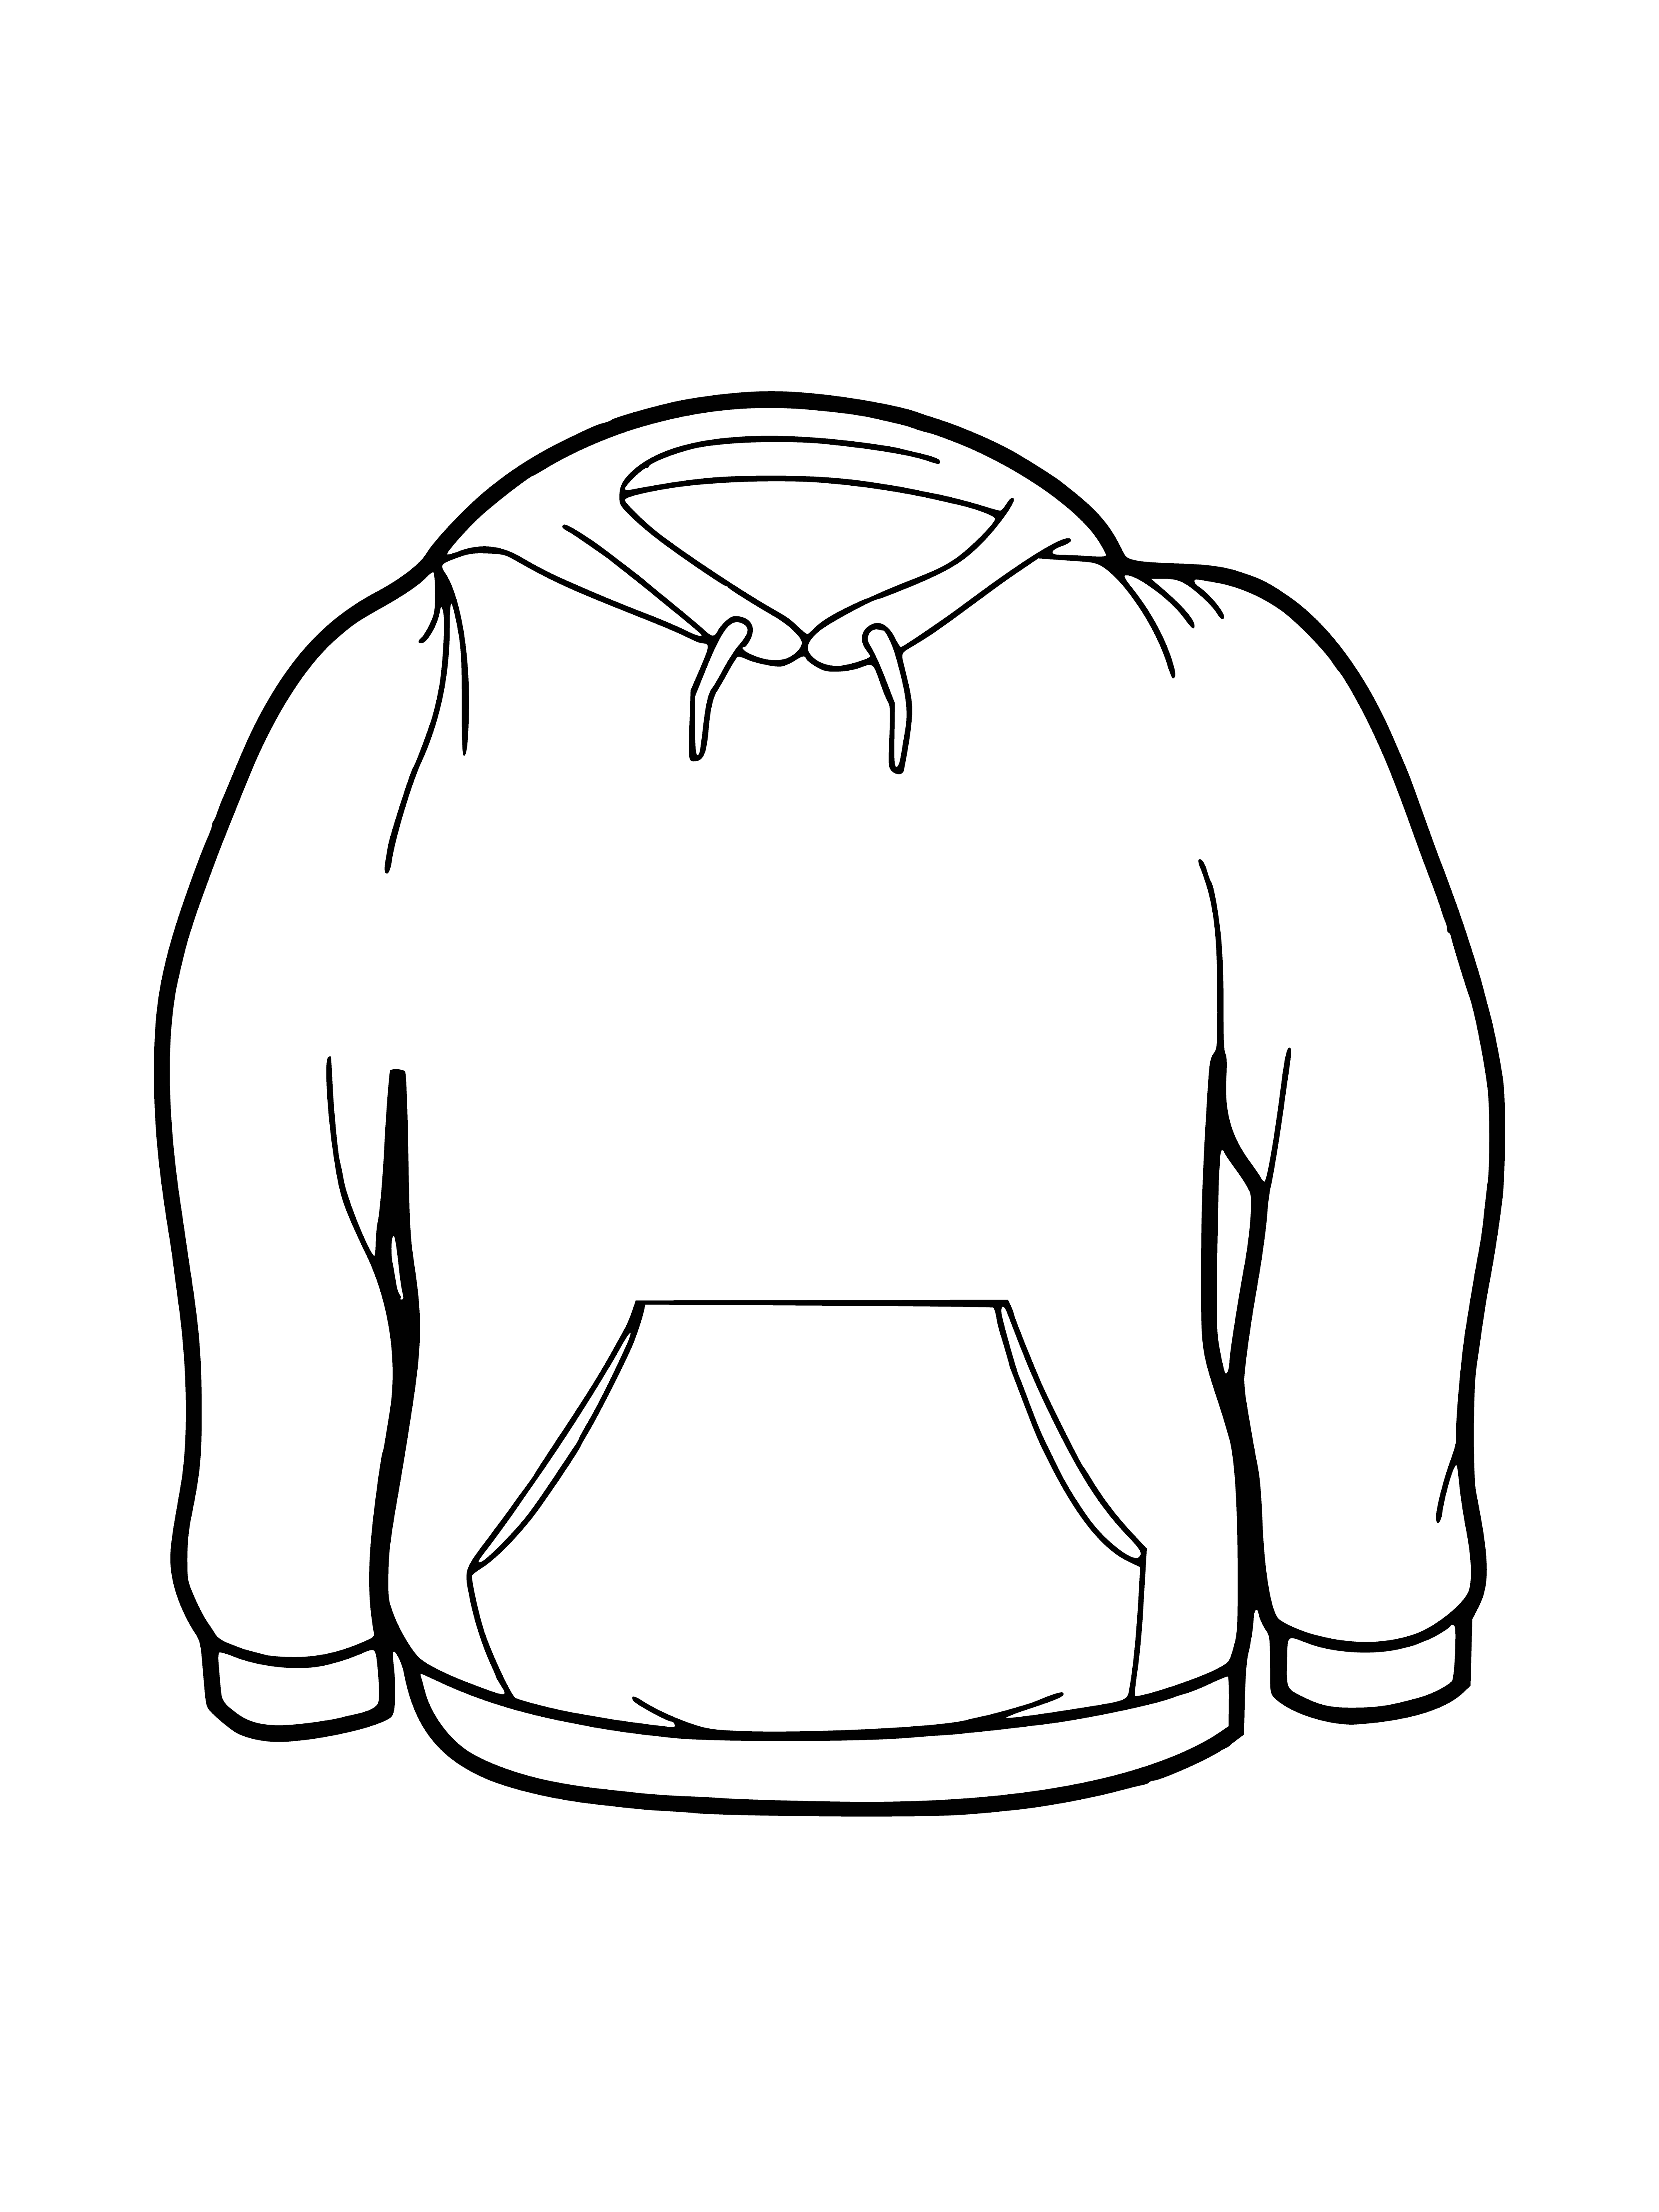 coloring page: Black hoodie w/ hood up, white string around edge & white lines. Has pocket on front.